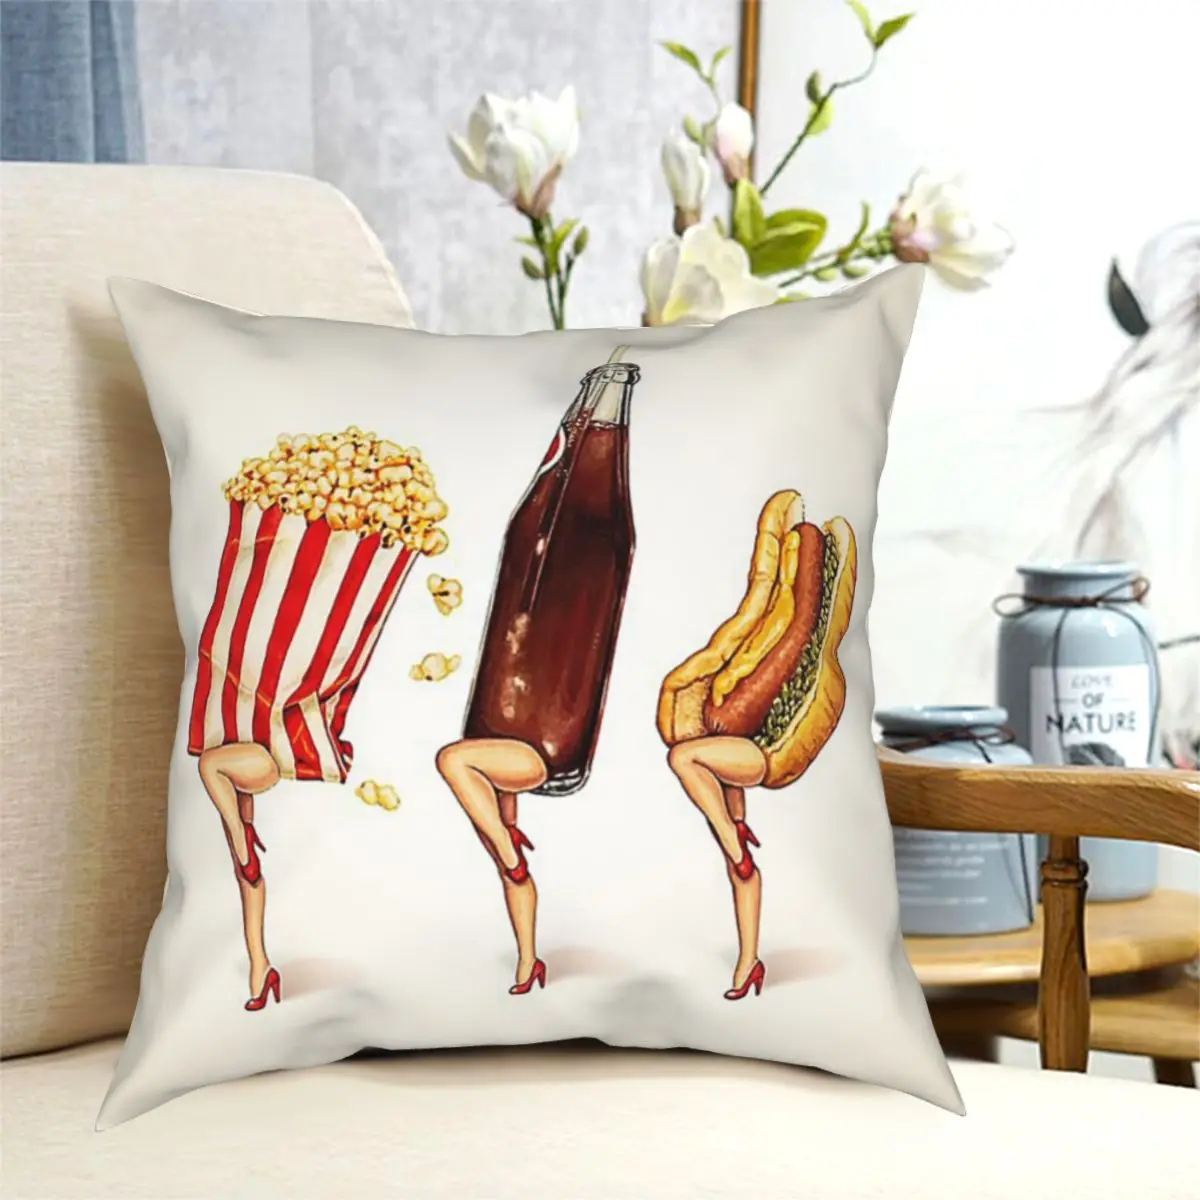 

New Food Let's All Go To The Lobby - Movie Girls Throw Pillow Cushion Cover Decorative Pillowcases Case Home Sofa Cushions